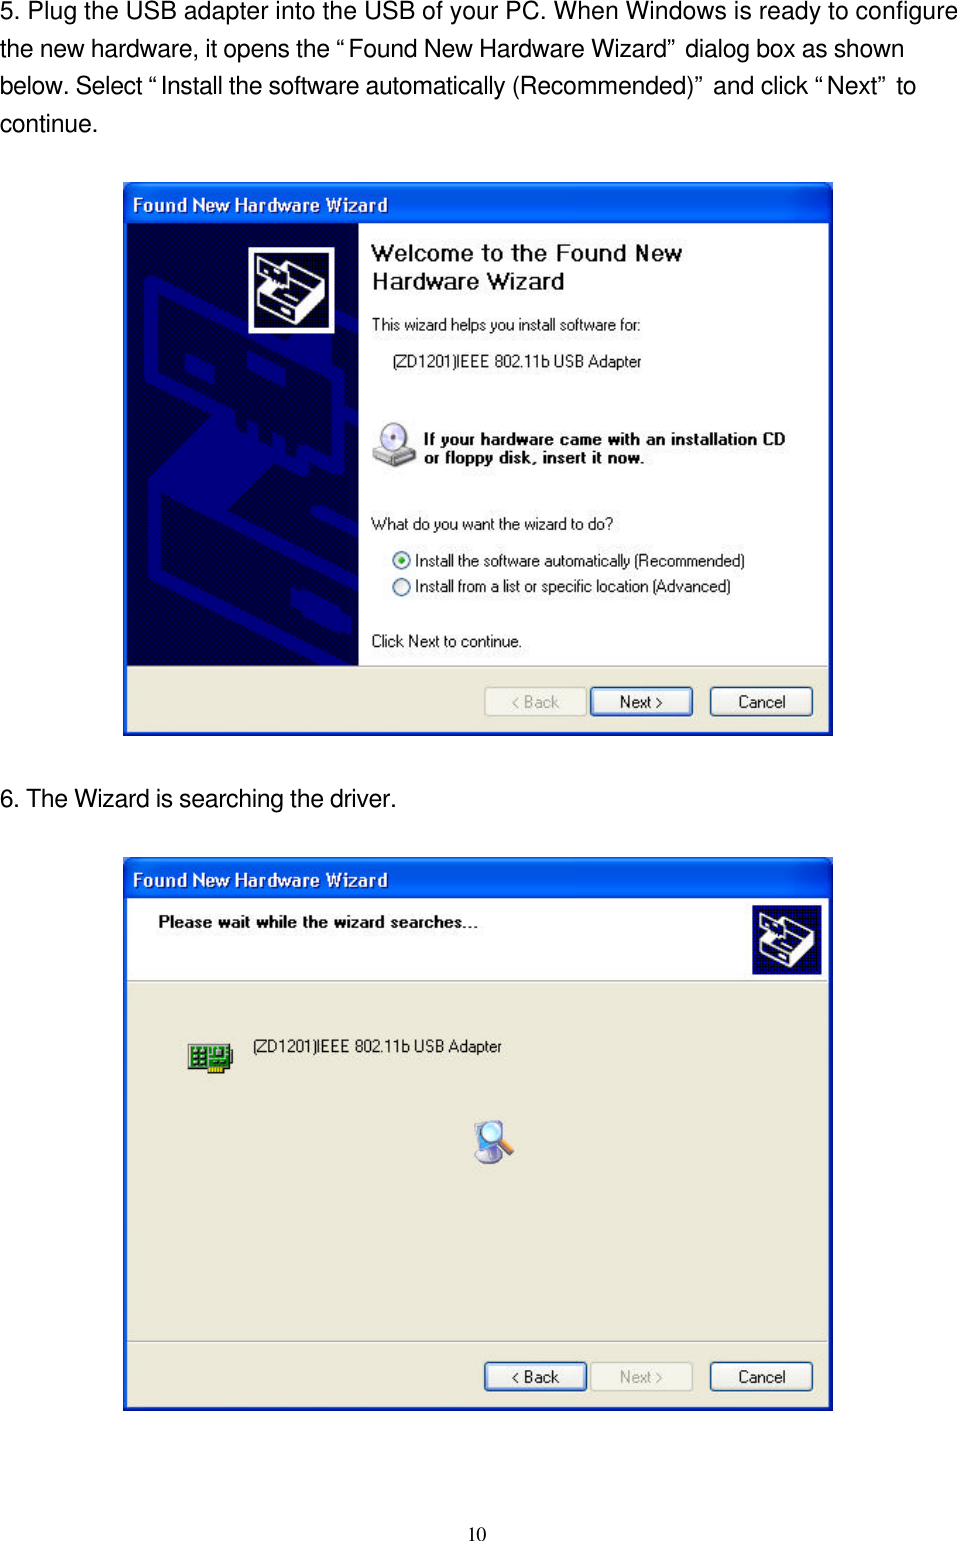  10 5. Plug the USB adapter into the USB of your PC. When Windows is ready to configure the new hardware, it opens the “Found New Hardware Wizard” dialog box as shown below. Select “Install the software automatically (Recommended)” and click “Next” to continue.    6. The Wizard is searching the driver.   